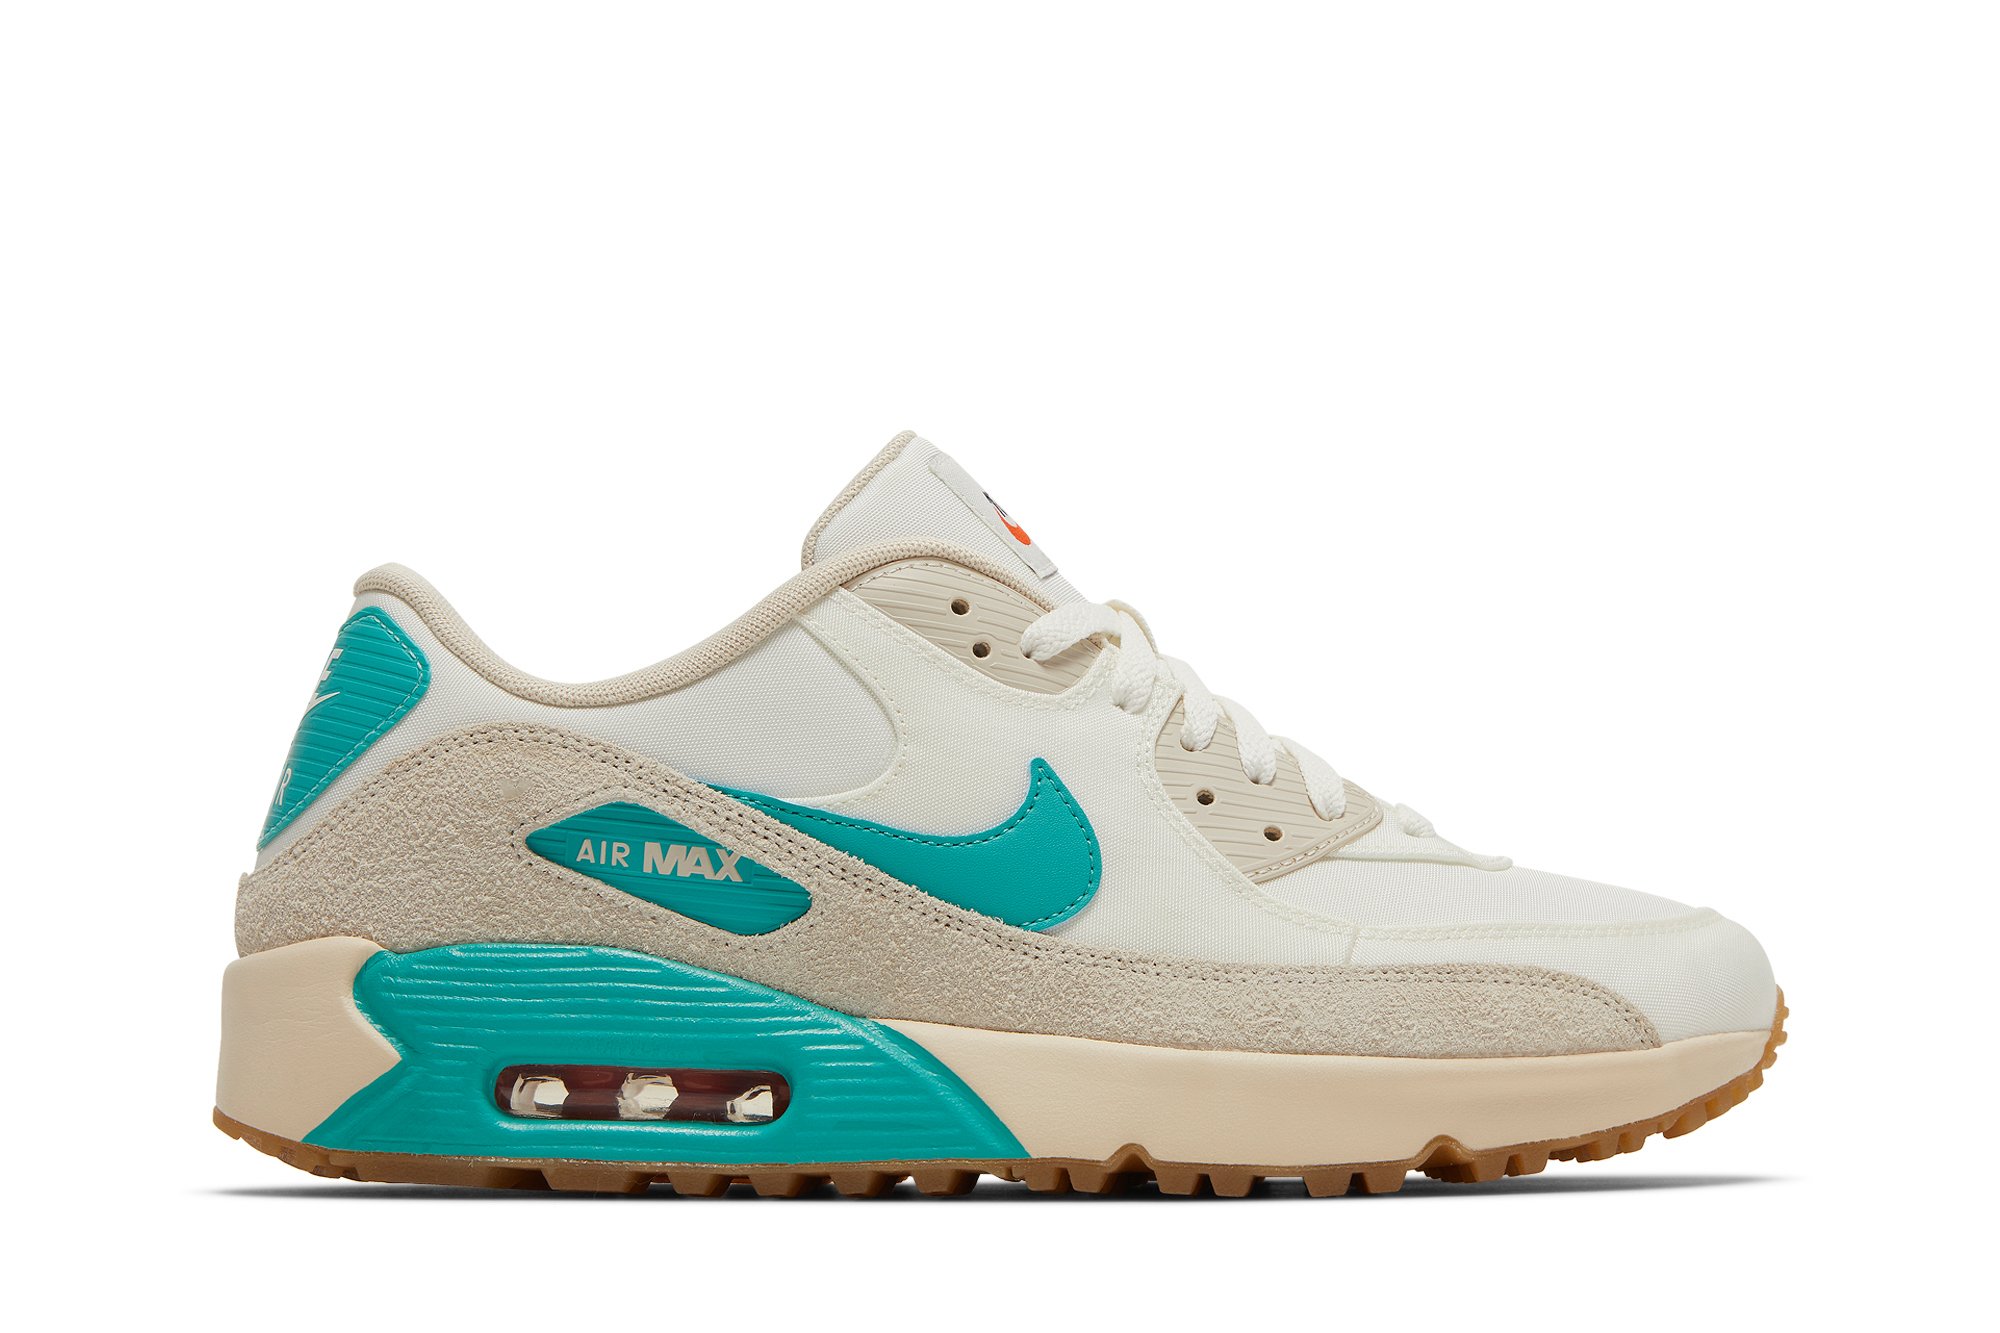 Air Max 90 Golf 'Washed Teal'